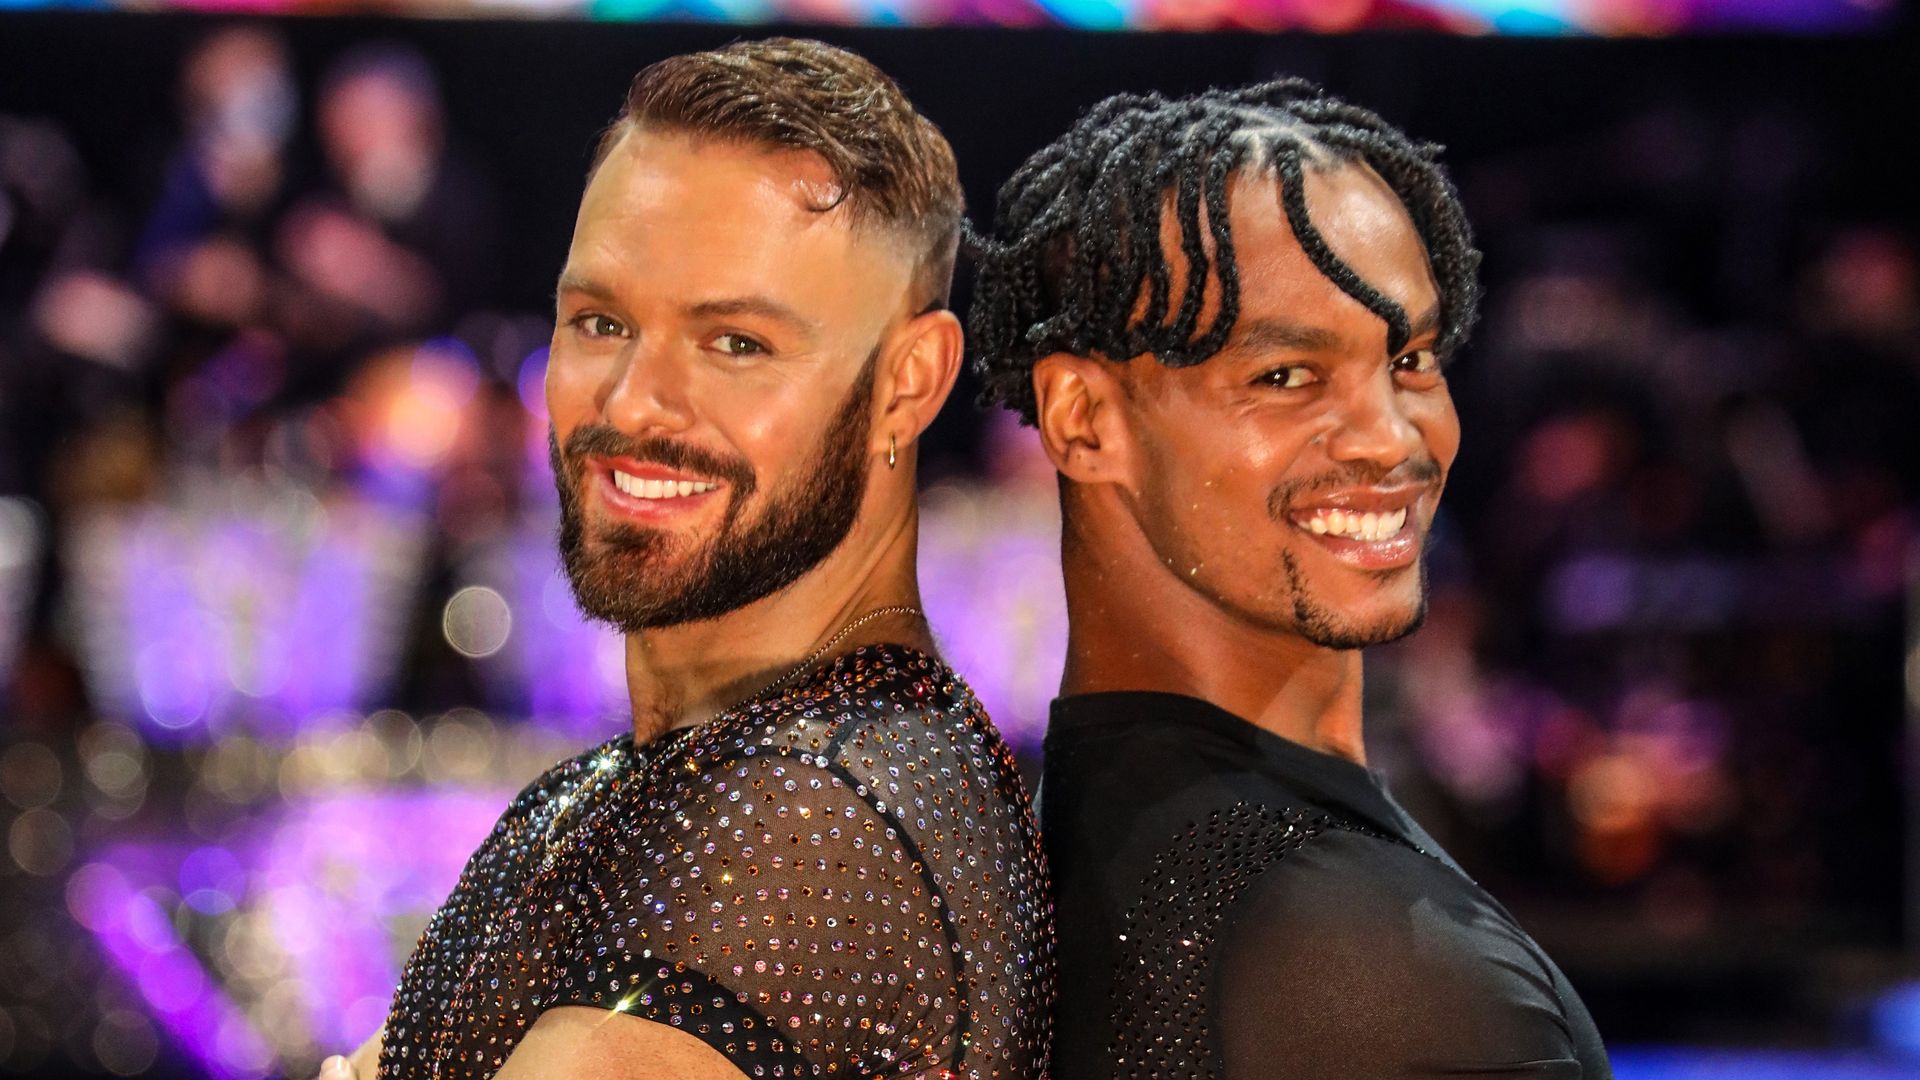 John Whaite and Johannes Radebe of the Strictly Come Dancing Live Tour 2022 